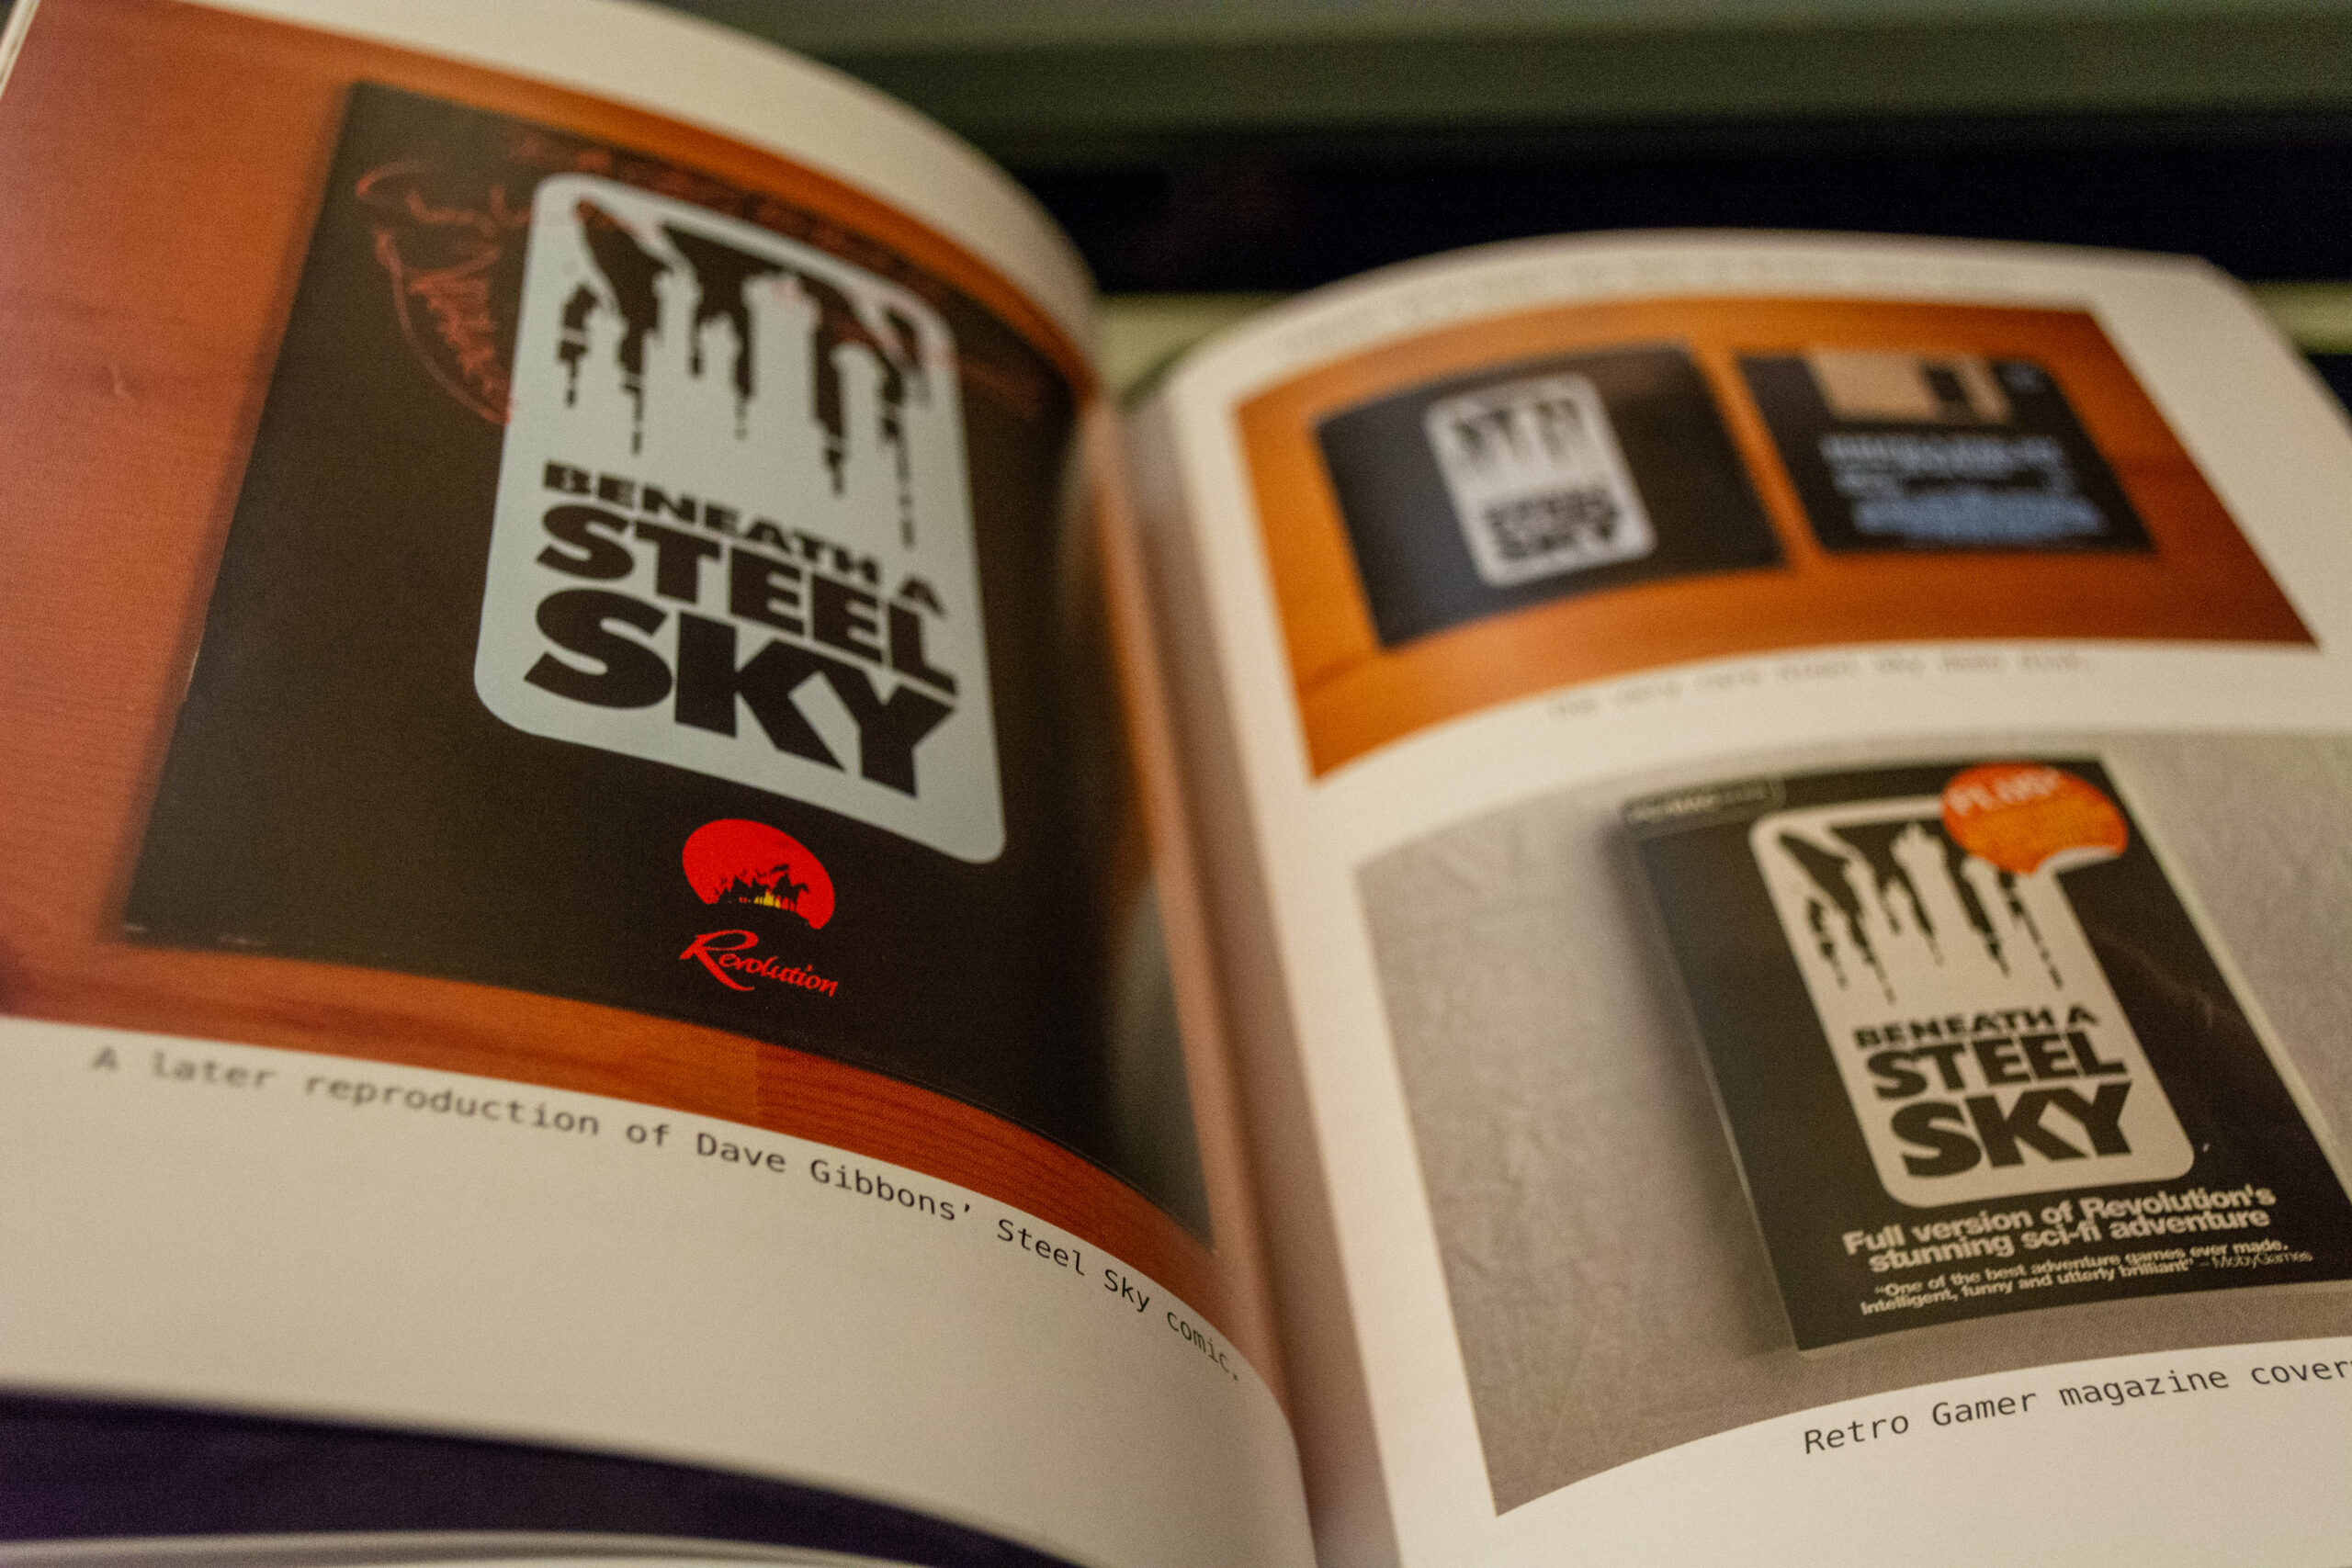 Photograph of a later reproduction of Dave Gibbons' Beneath a Steel Sky comic in Tony Warriner - Revolution: The Quest for Game Development Greatness book